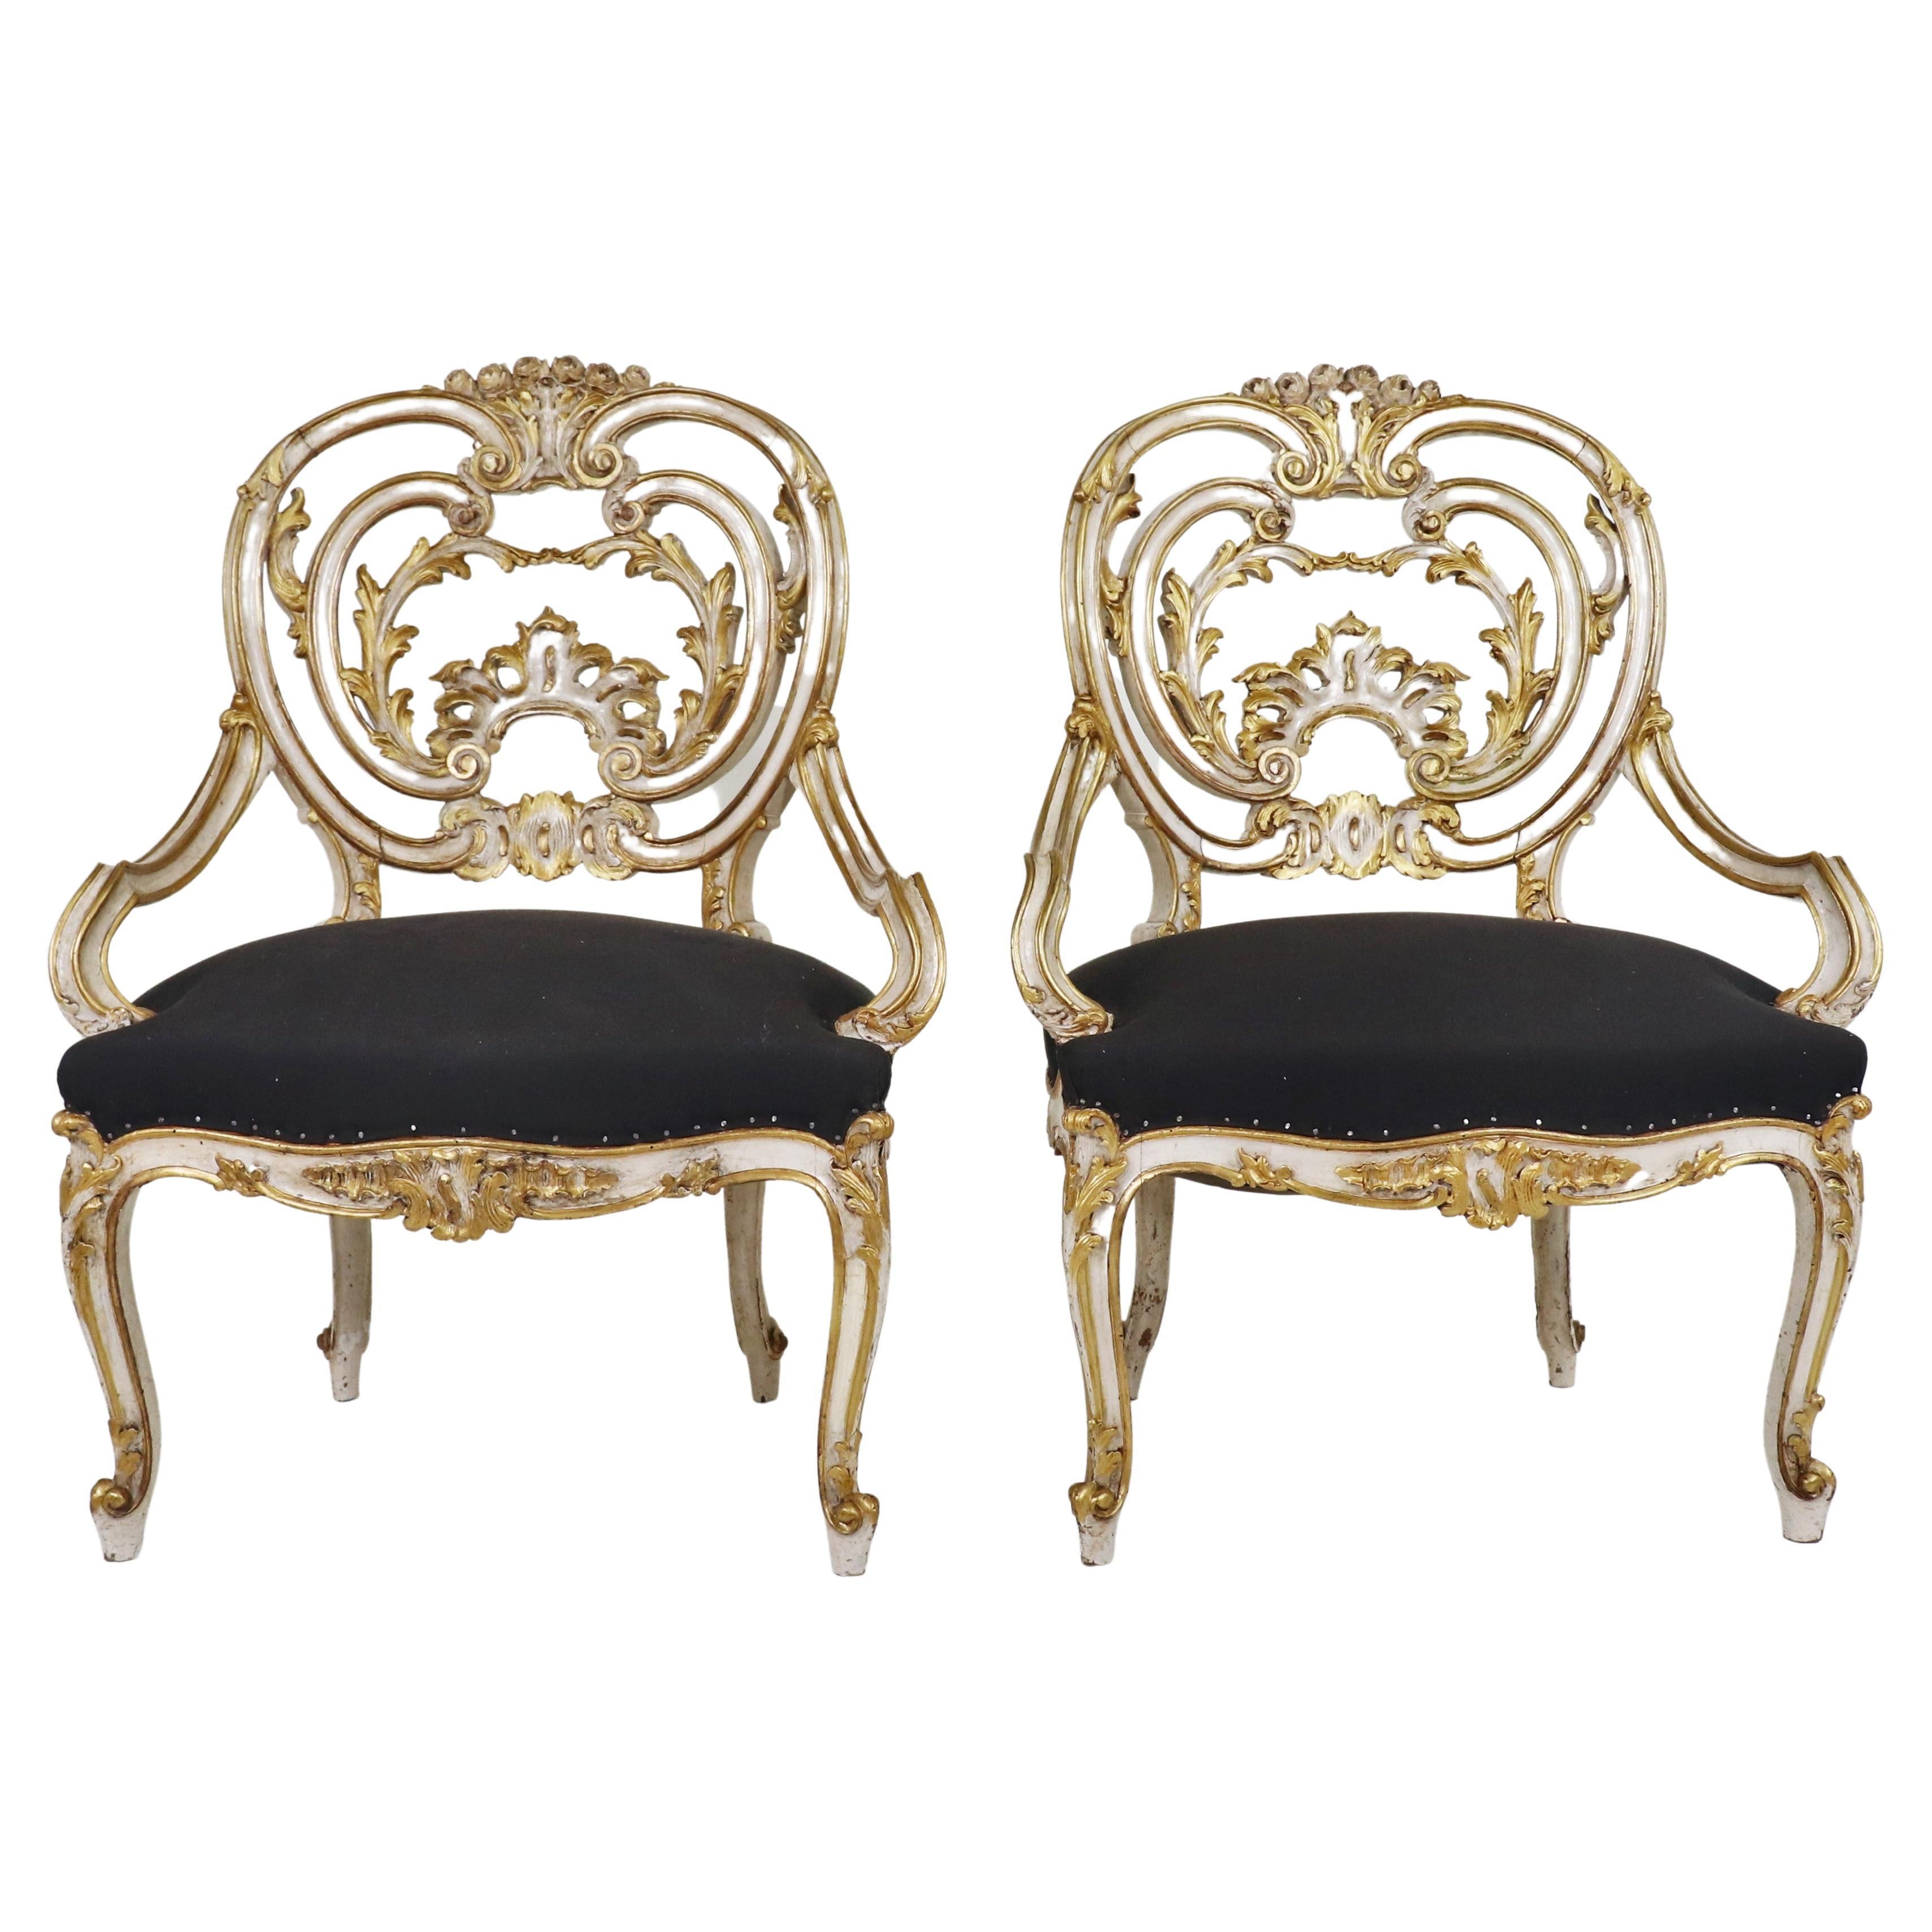 Pair of Early 19th Century Louis XIV Style Fauteuil Armchairs by Maison Jansen